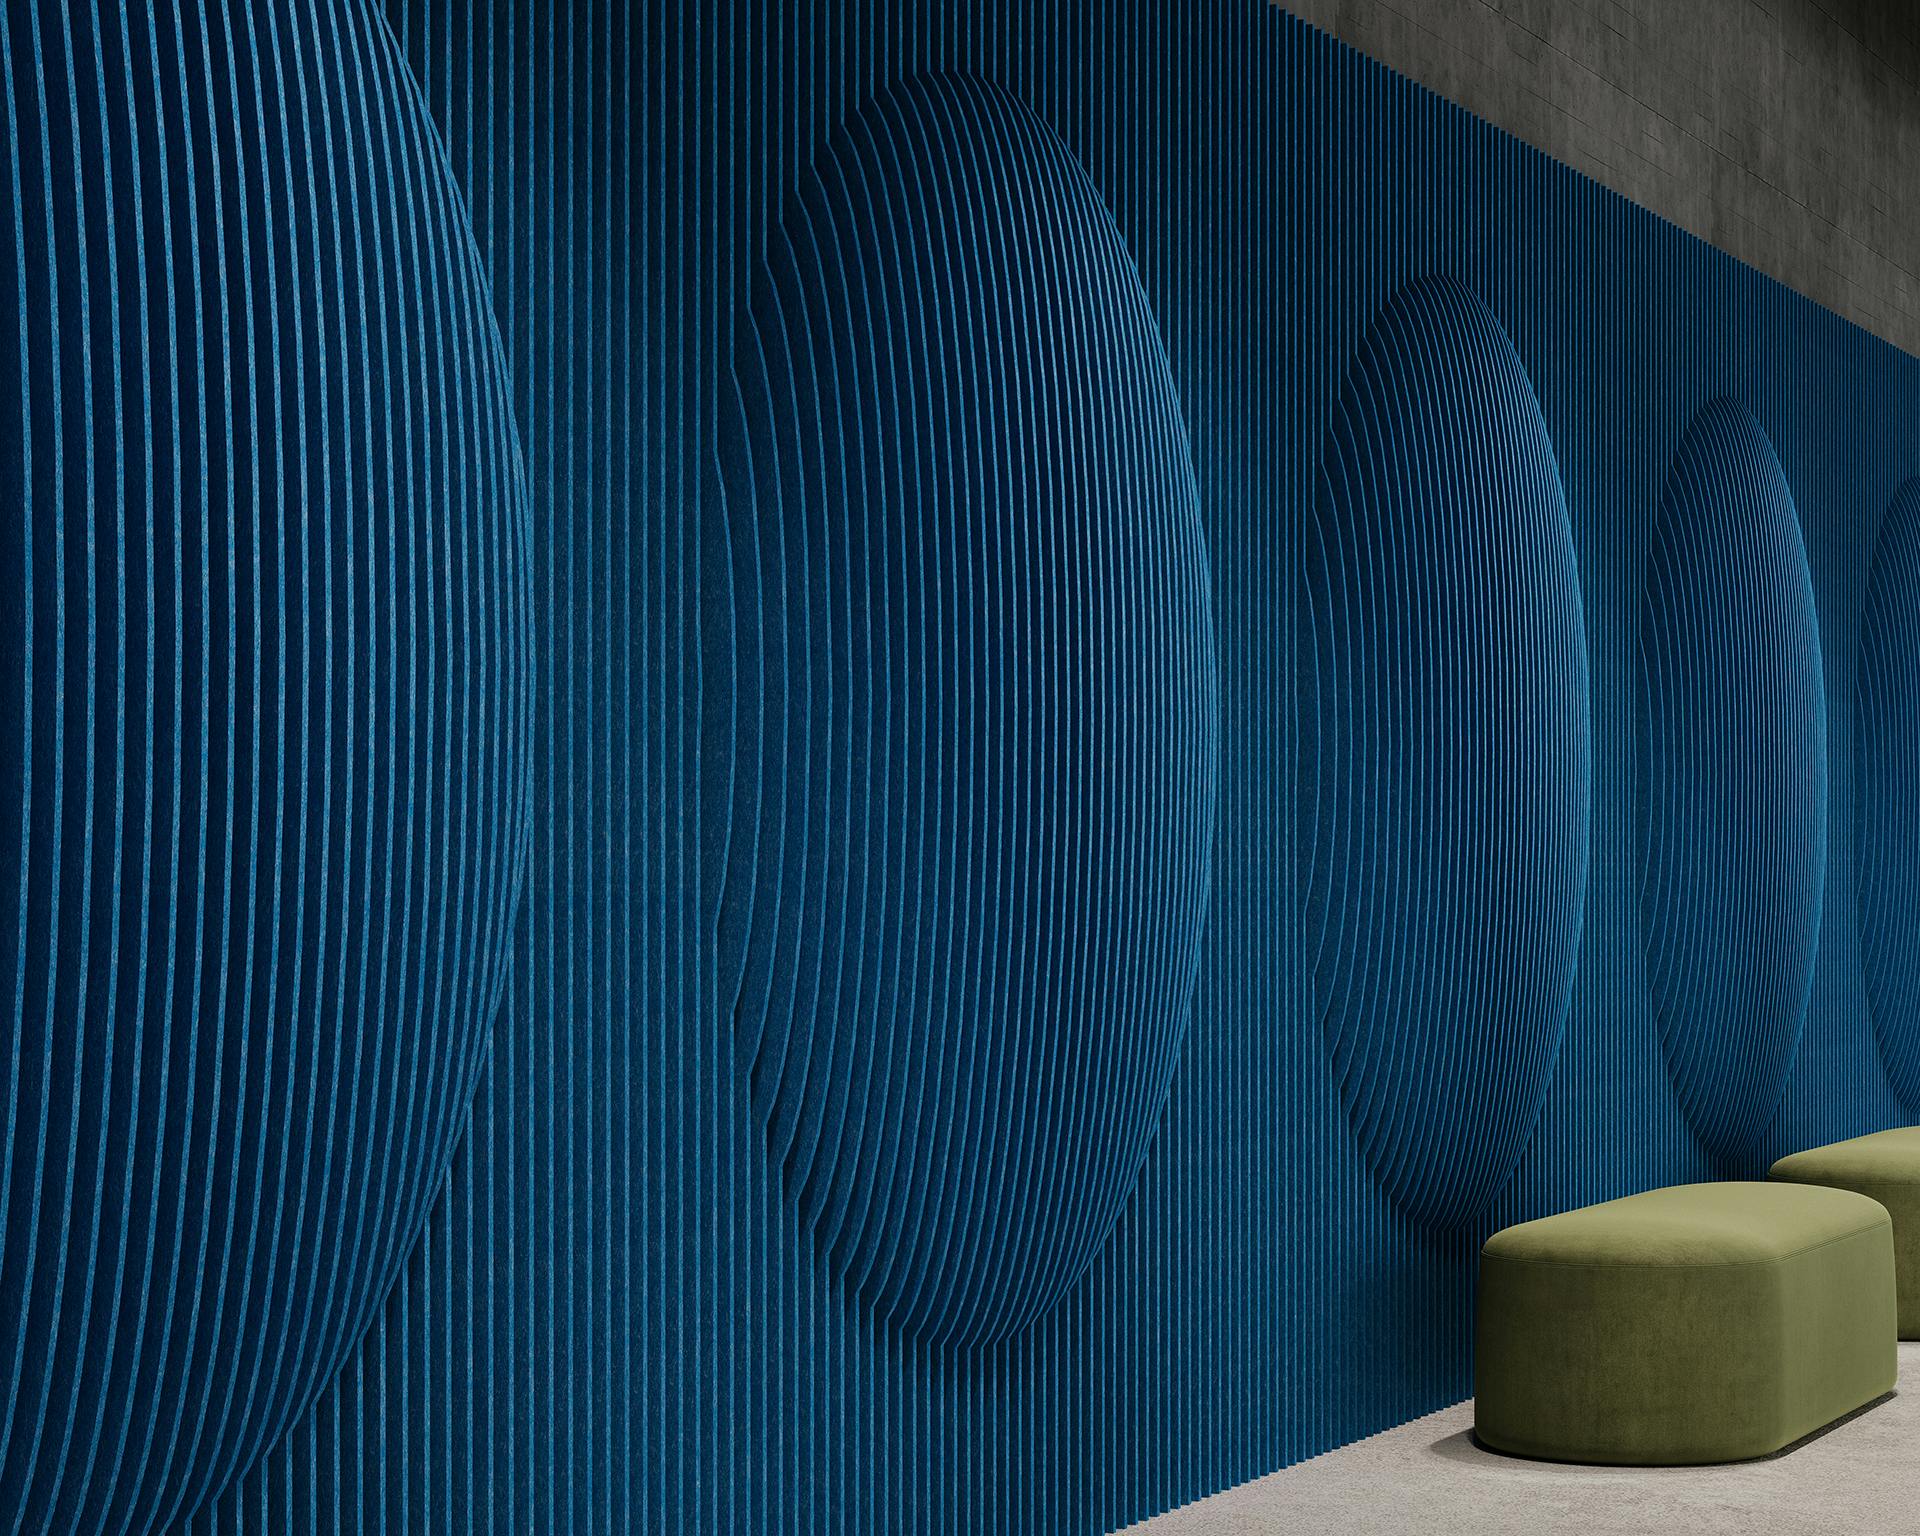 A modern wall art installation featuring a series of large, indented oval shapes on a textured, ribbed blue surface. A single olive-green cushioned bench is placed against the wall on a light gray floor. The overall scene is minimalist and contemporary.